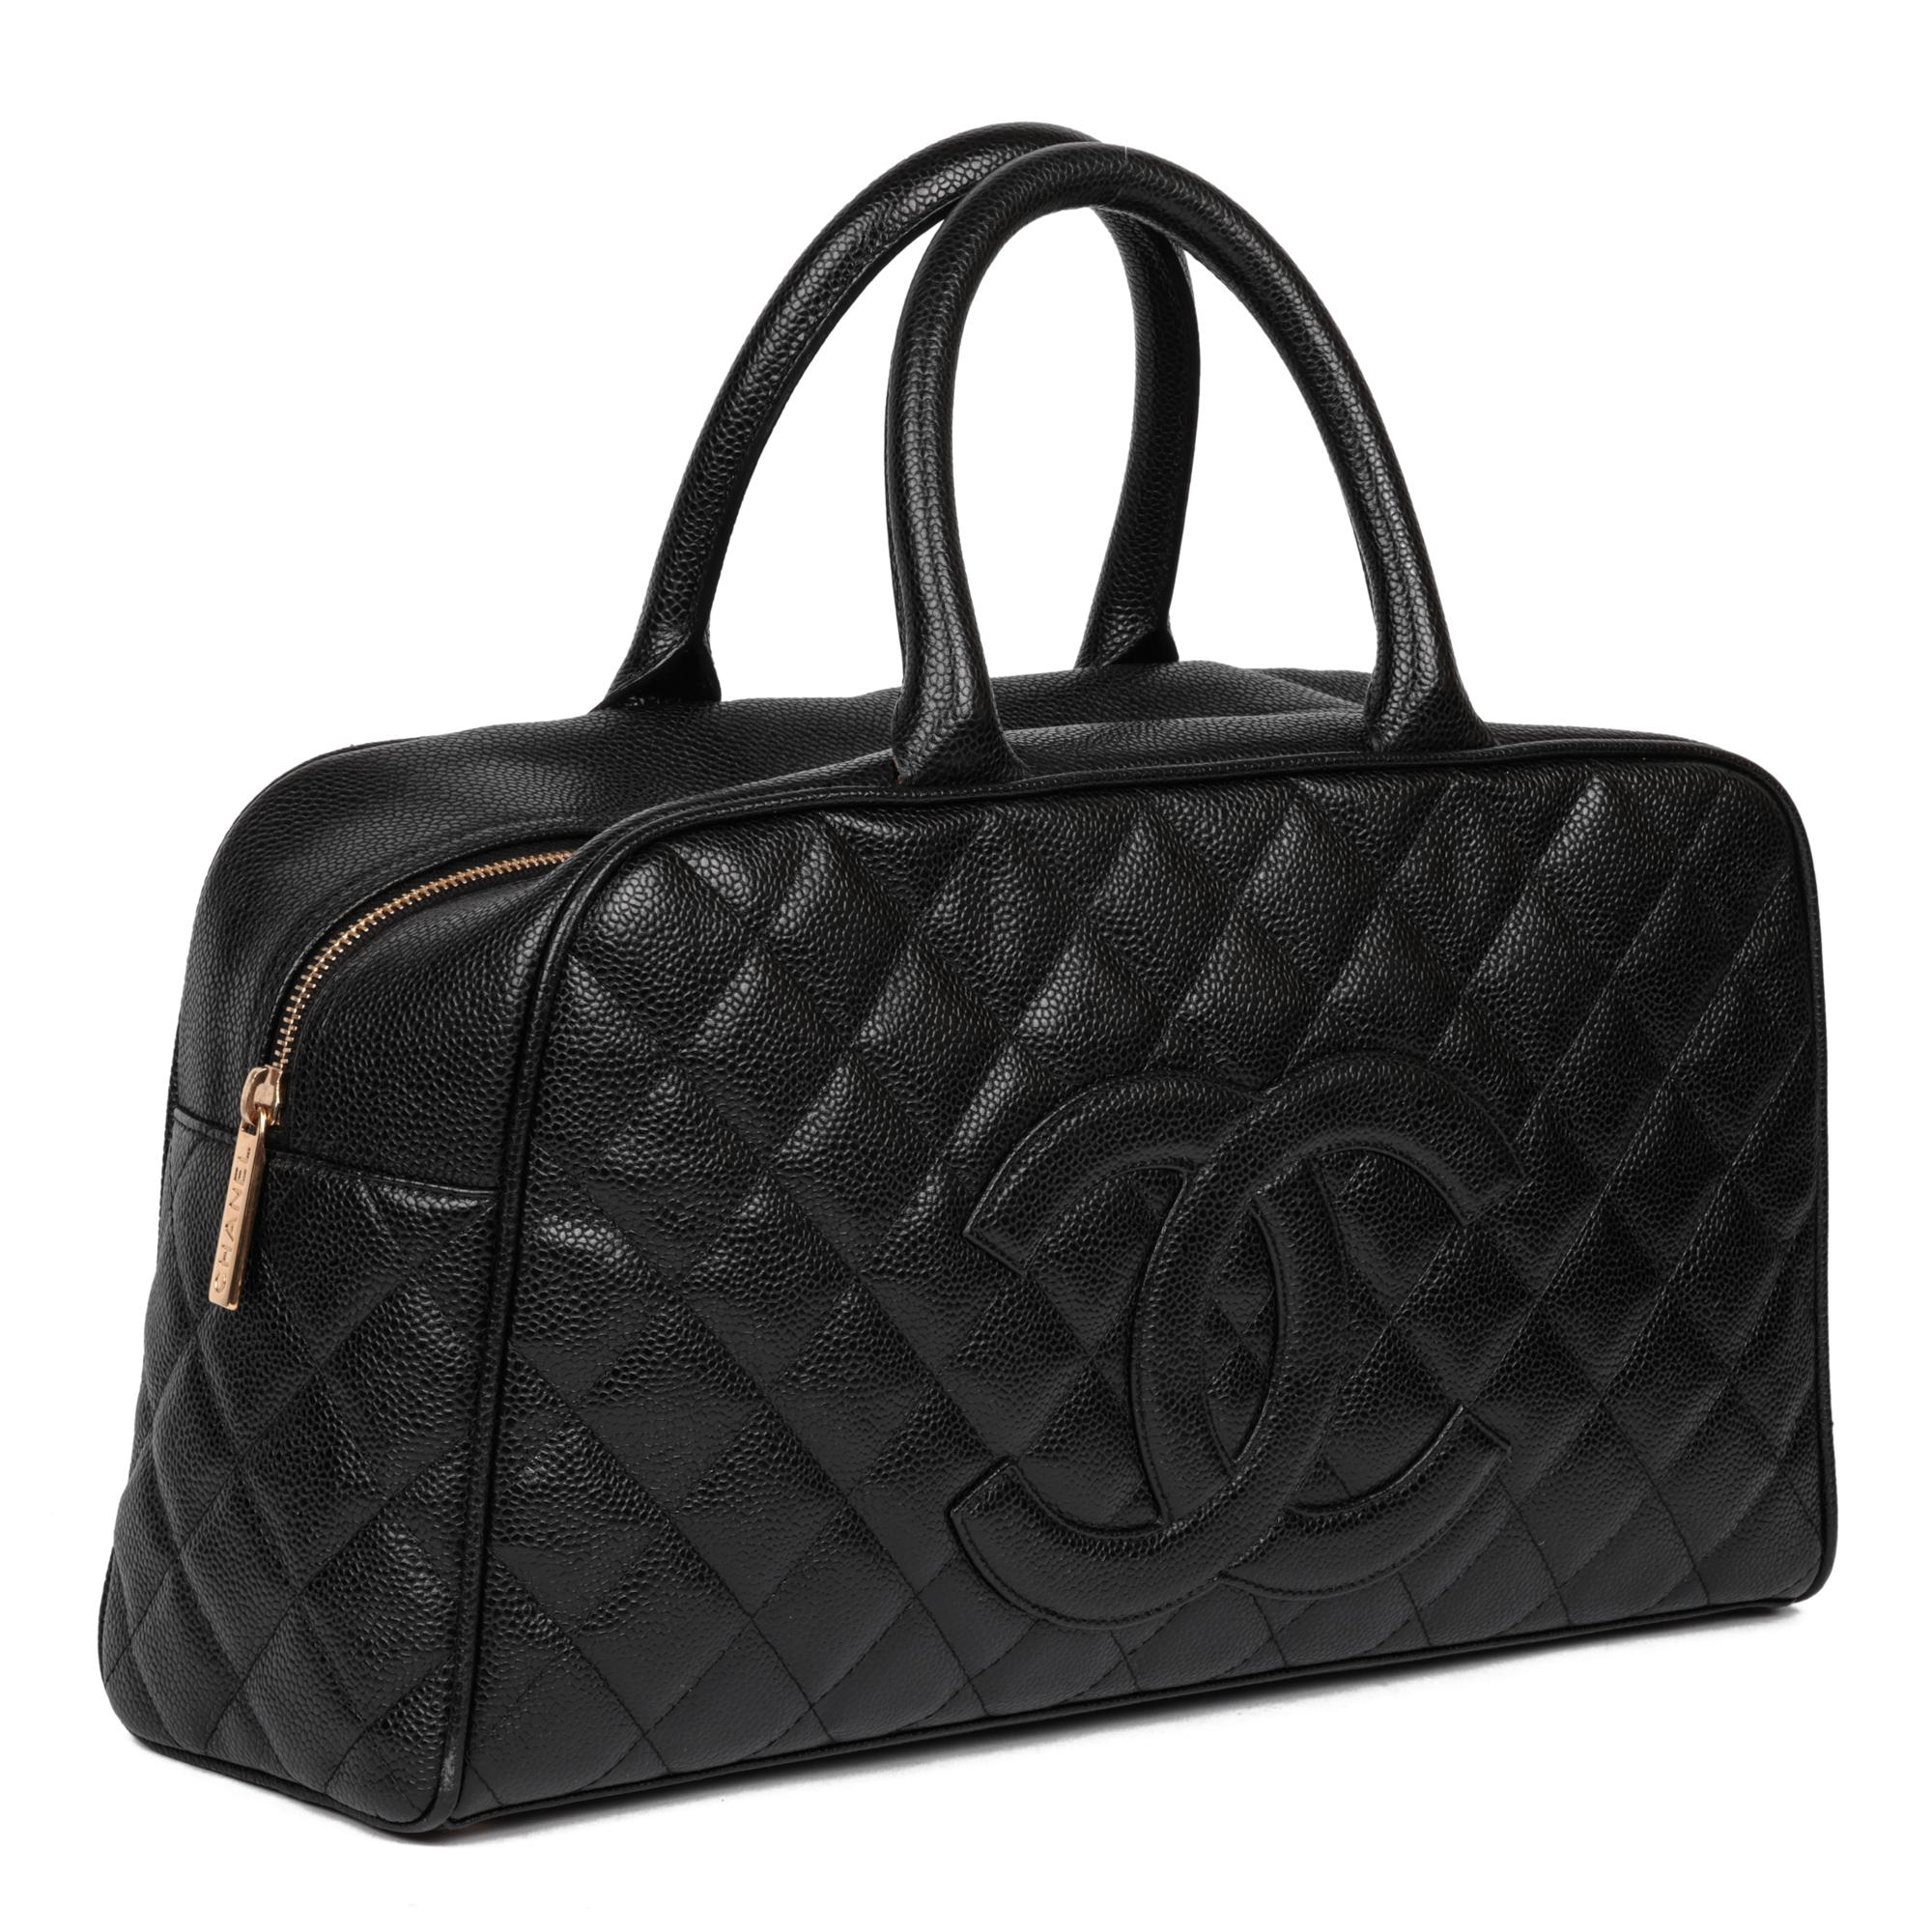 CHANEL
Black Quilted Caviar Leather Boston Bag

Xupes Reference: HB5140
Serial Number: 9401457
Age (Circa): 2005
Accompanied By: Chanel Dust Bag
Authenticity Details: Date Stamp (Made in Italy)
Gender: Ladies
Type: Tote

Colour: Black
Hardware: